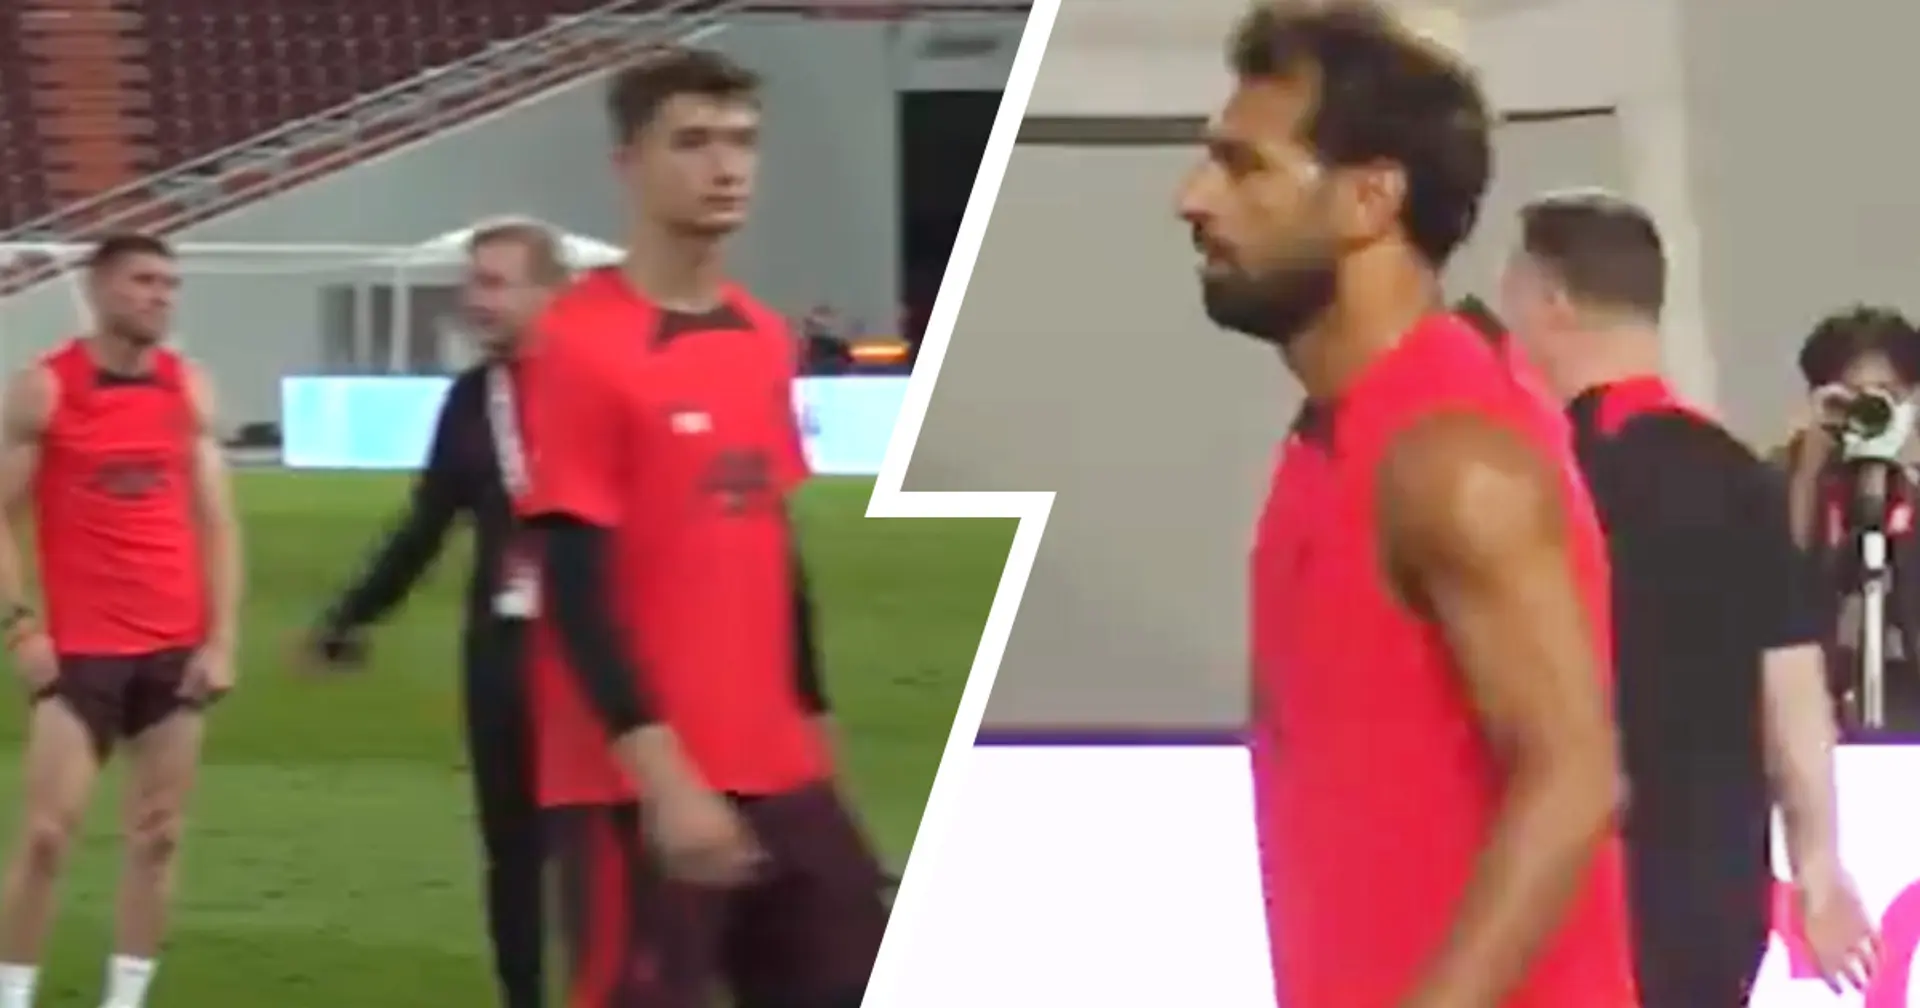 Injury fears increase at Liverpool camp: 3 players missing, Elliott seen with bandaged hand